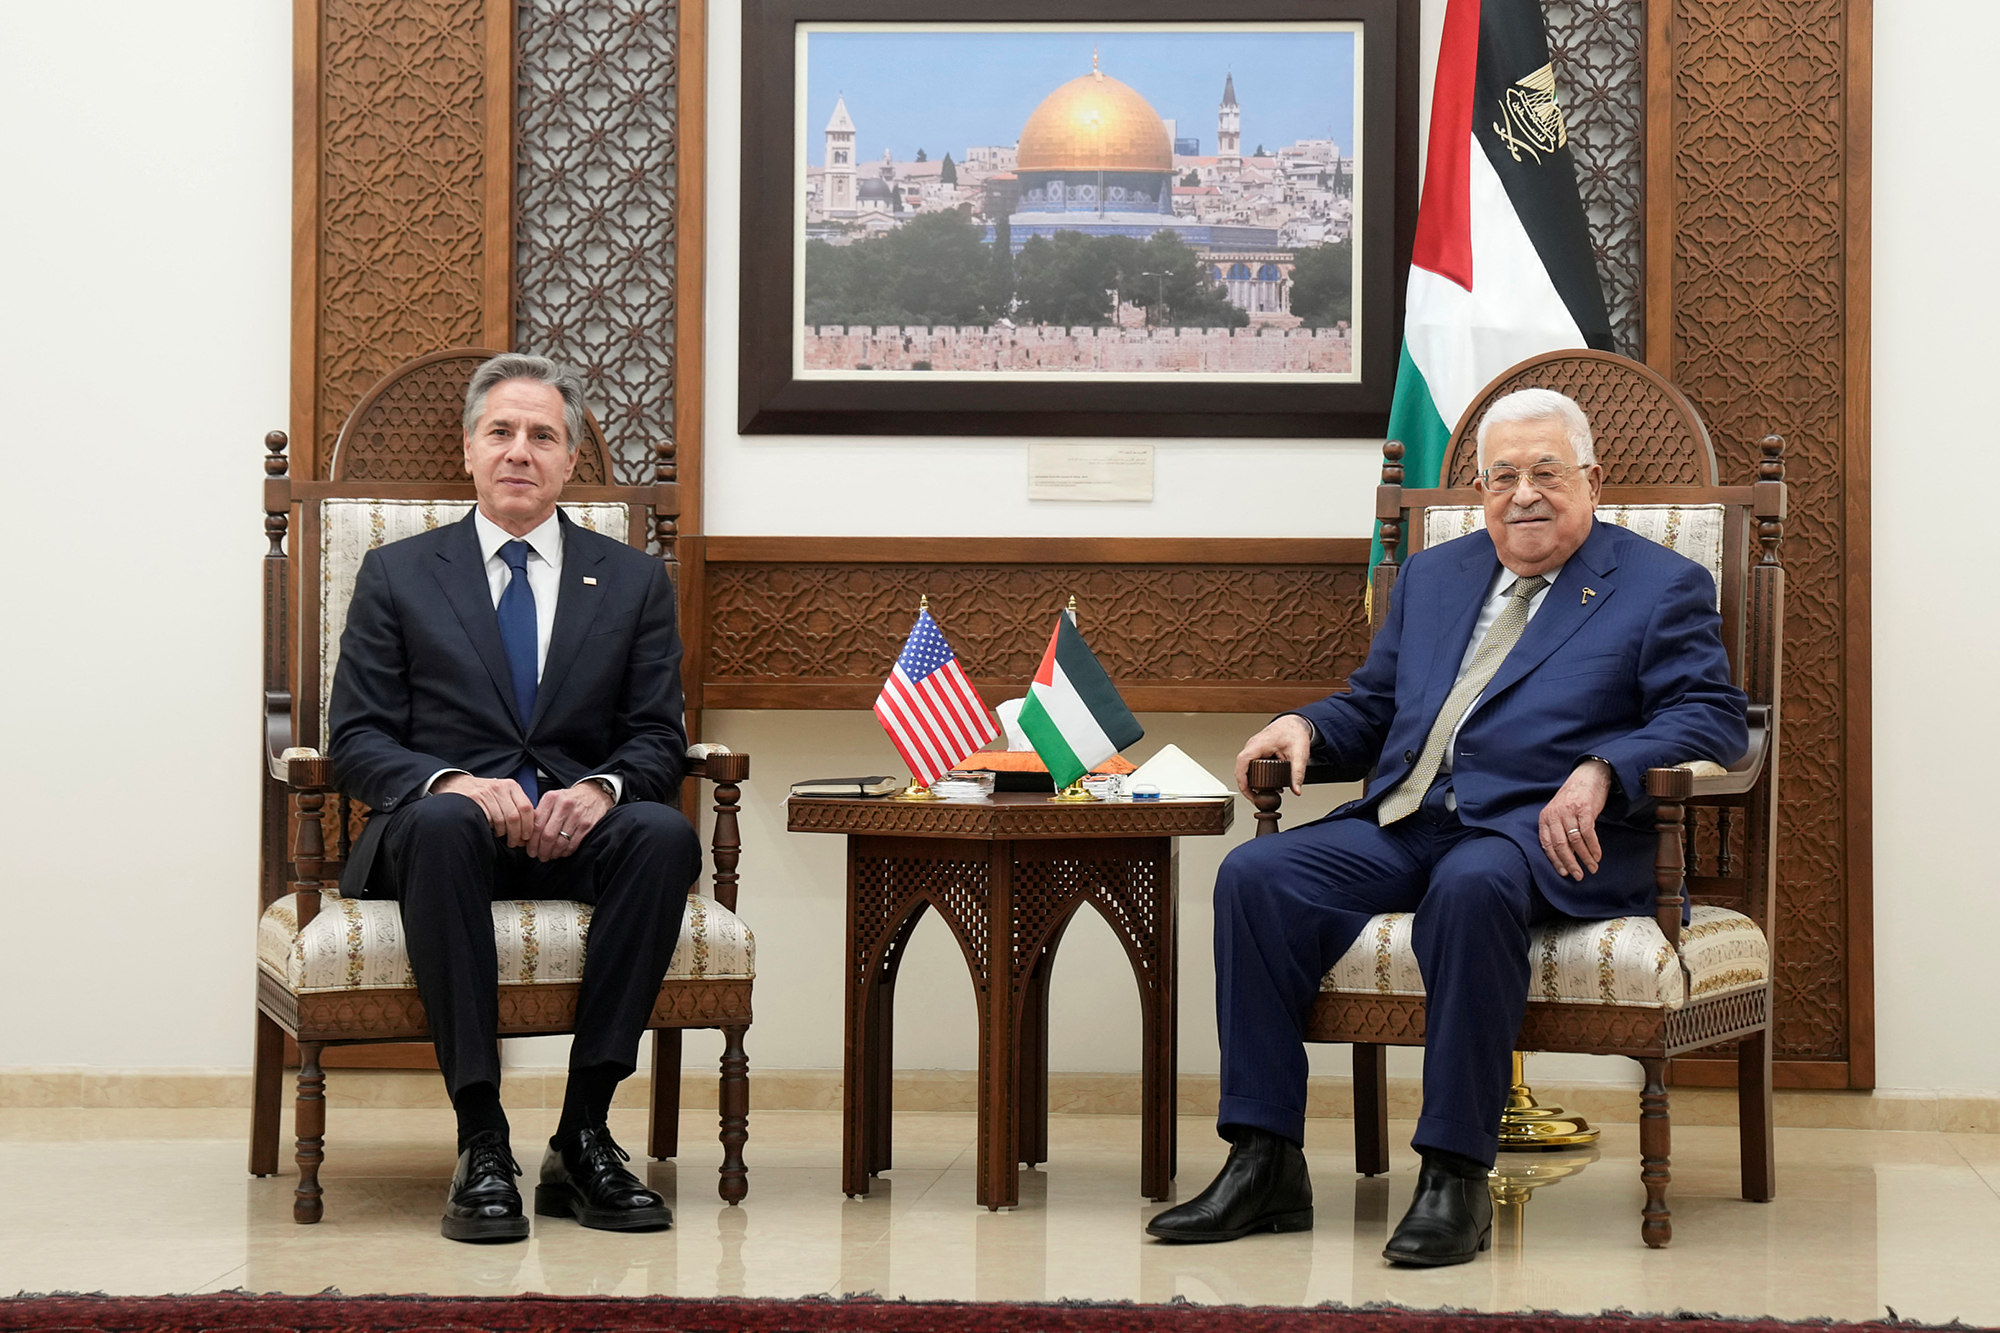 U.S. Secretary of State Antony Blinken, left, and Palestinian President Mahmoud Abbas meet in the West Bank town of Ramallah, on February 7.